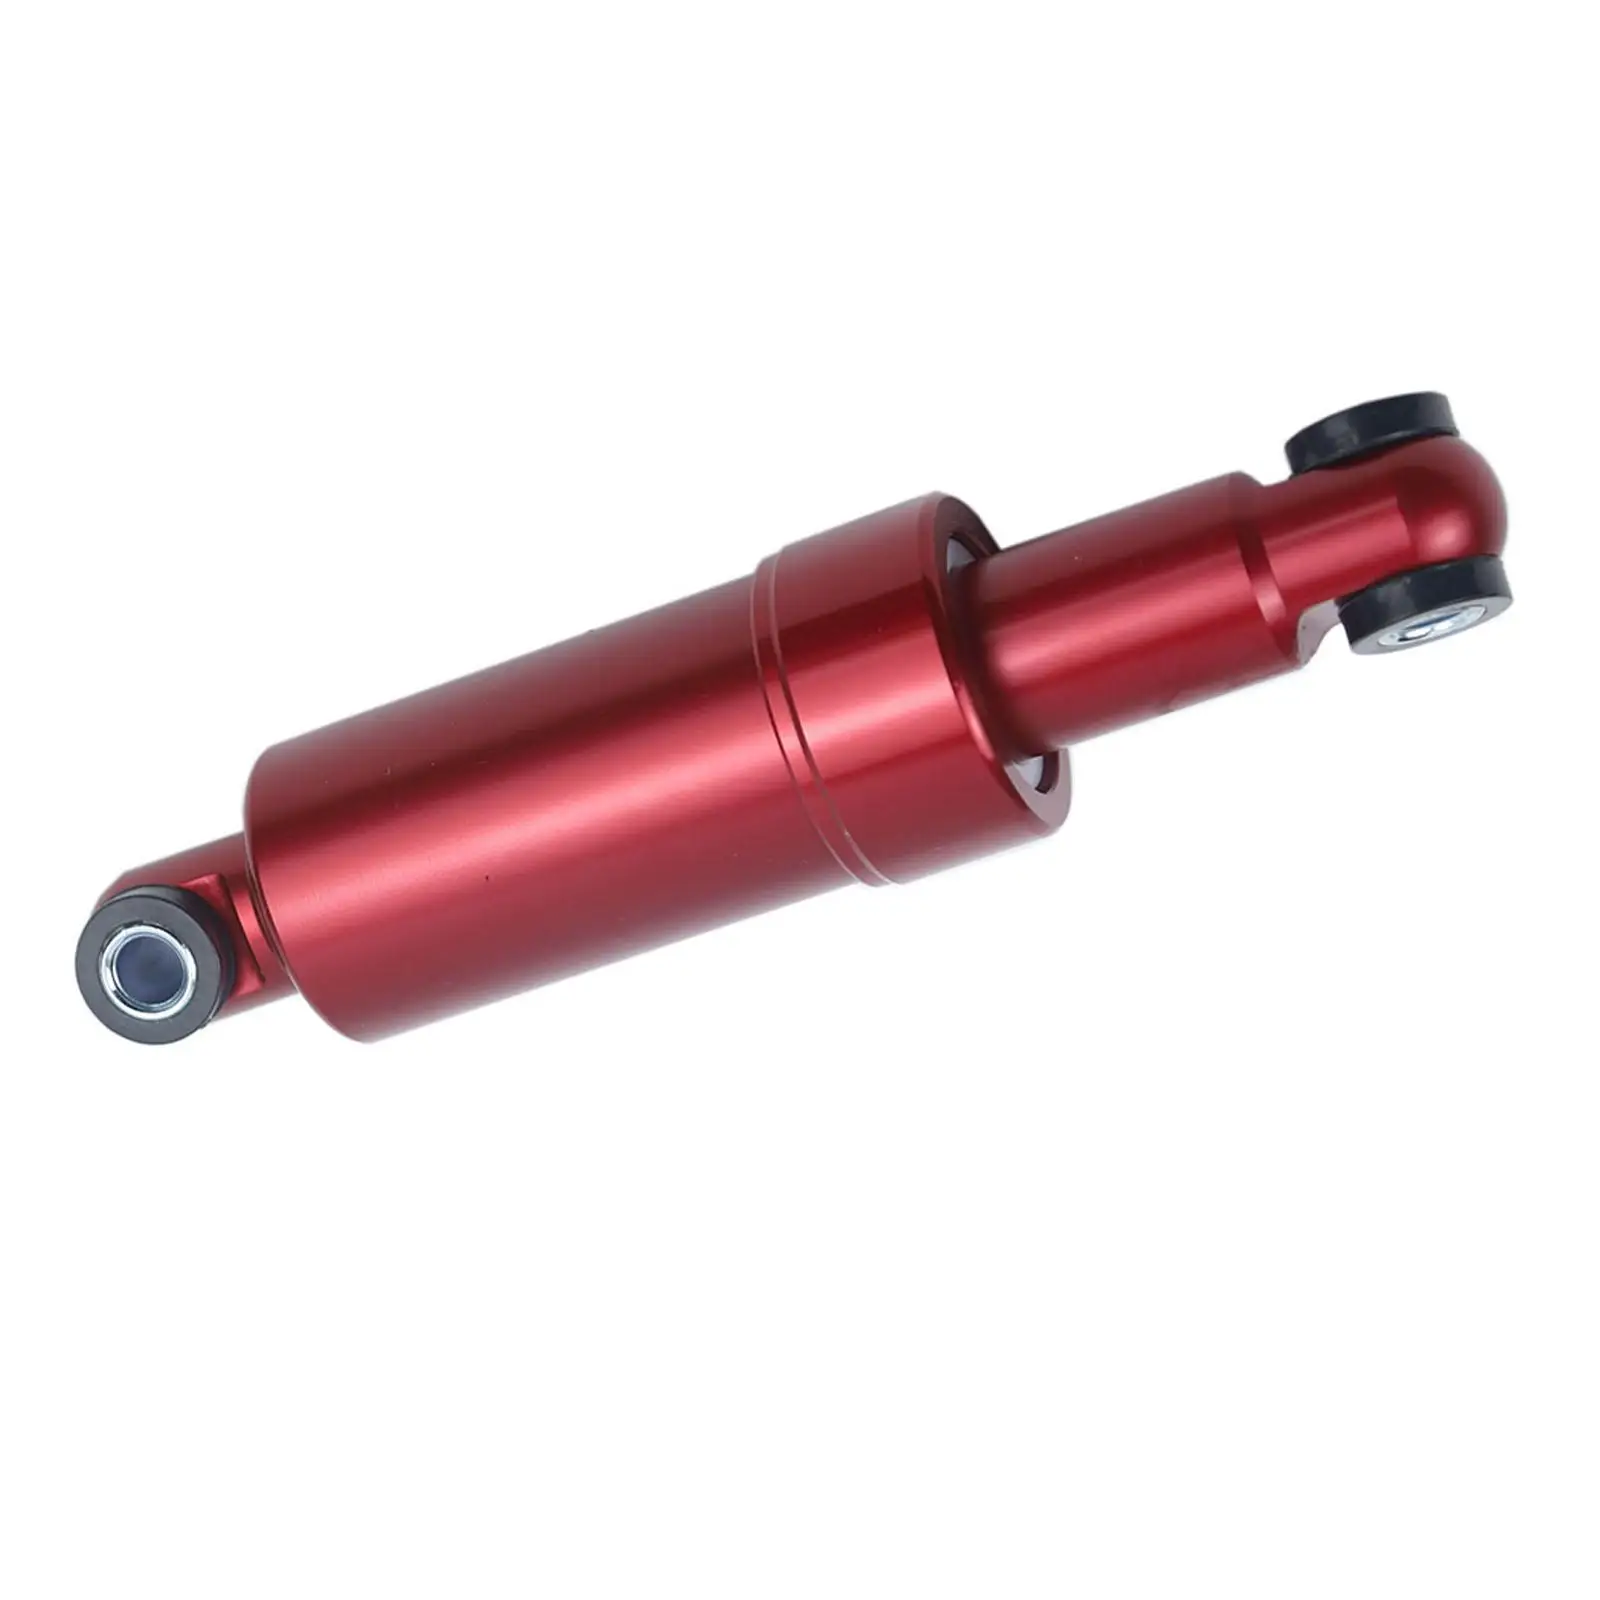 150mm Aluminum Alloy Suspension Shock Absorber for Folding Scooter